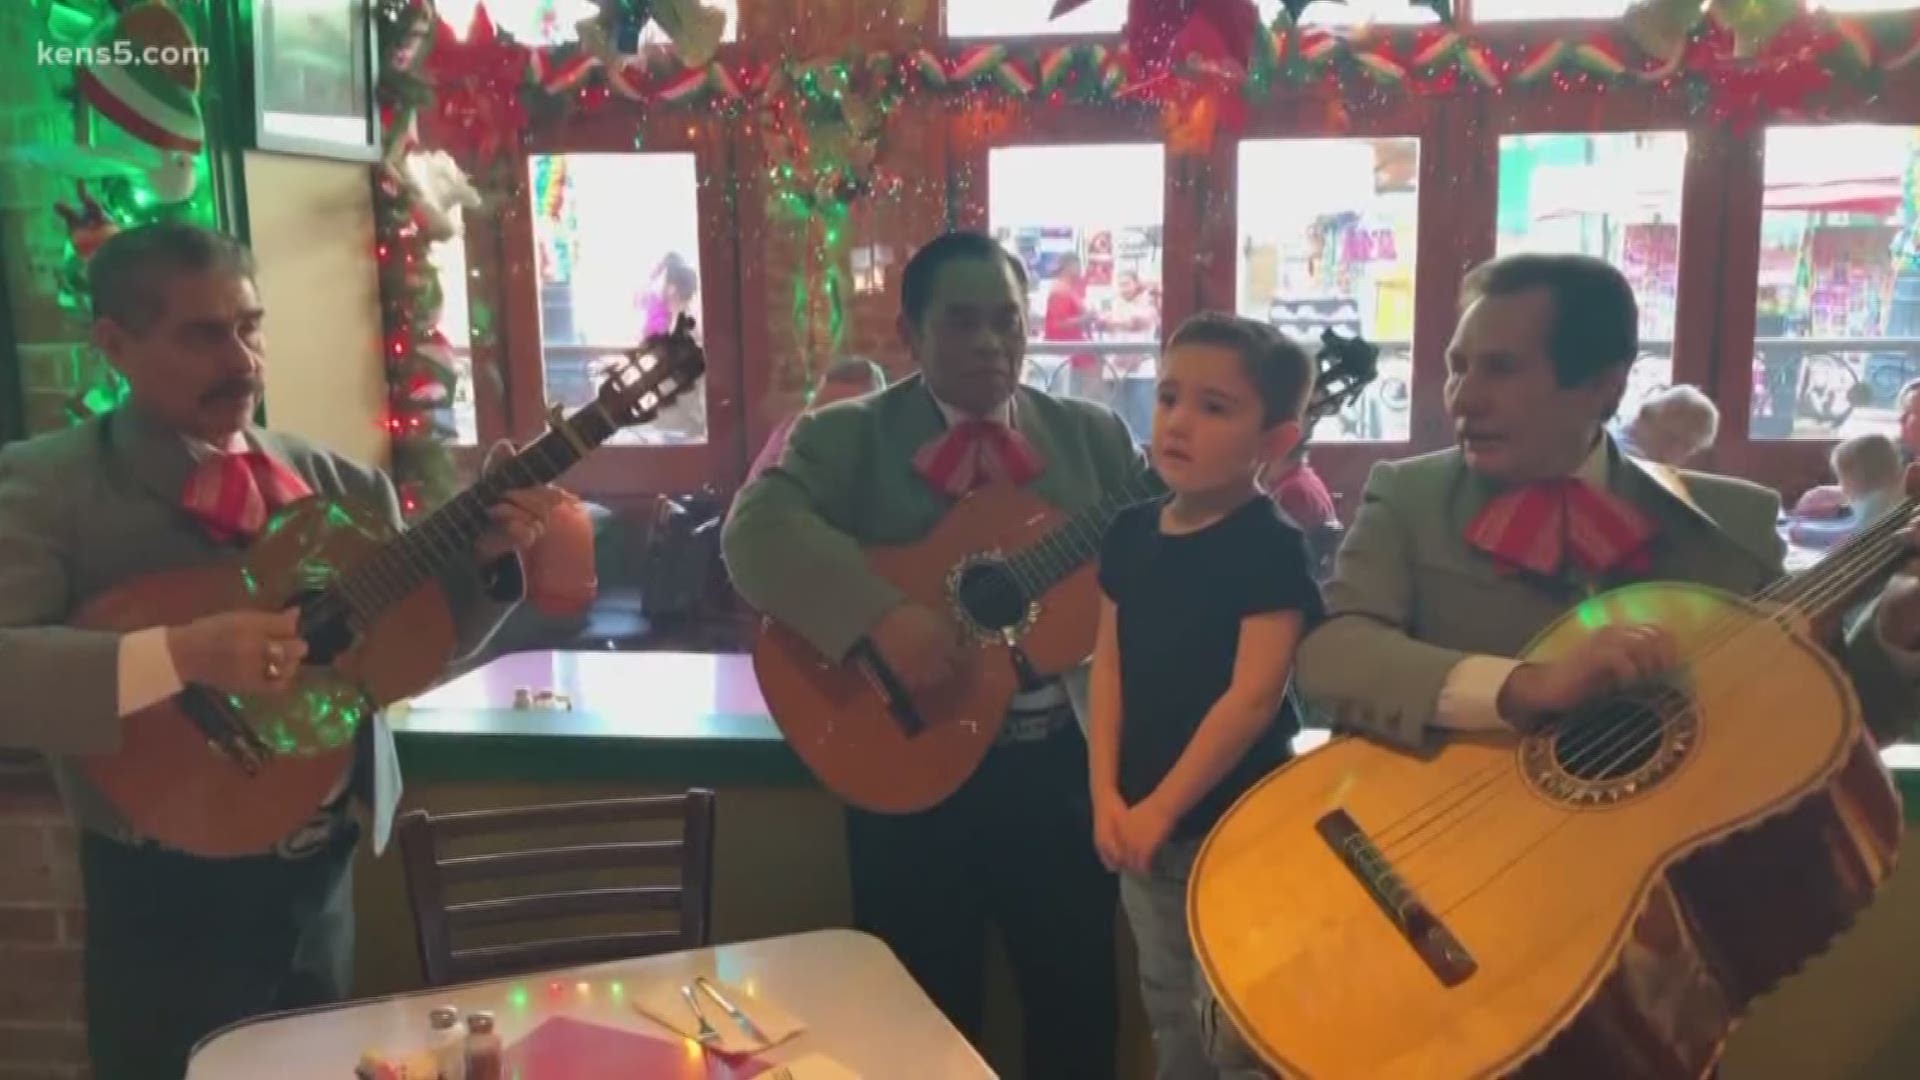 If you're at market square or walking the River walk, you may hear a rare sound among the mariachis - a four-year-old with a voice beyond compare. Eyewitness News reporter Marvin Hurst introduces us to the mariachi kid.